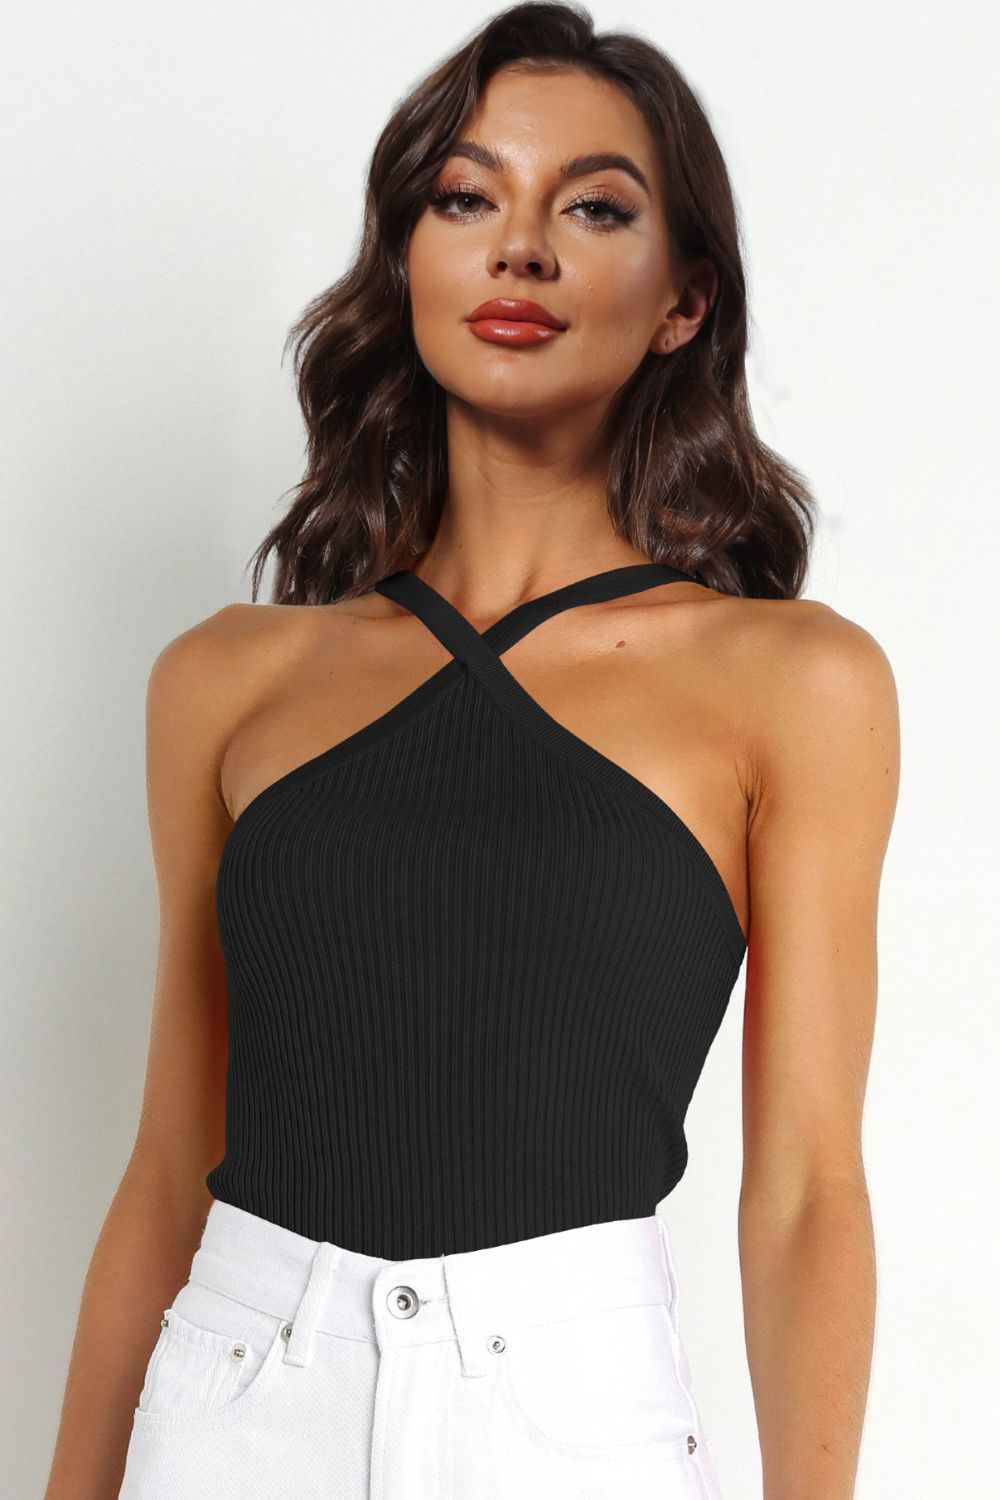 Free People - Square Neck Seamless Cami Crop Top - Black - Miss Monroe  Boutique